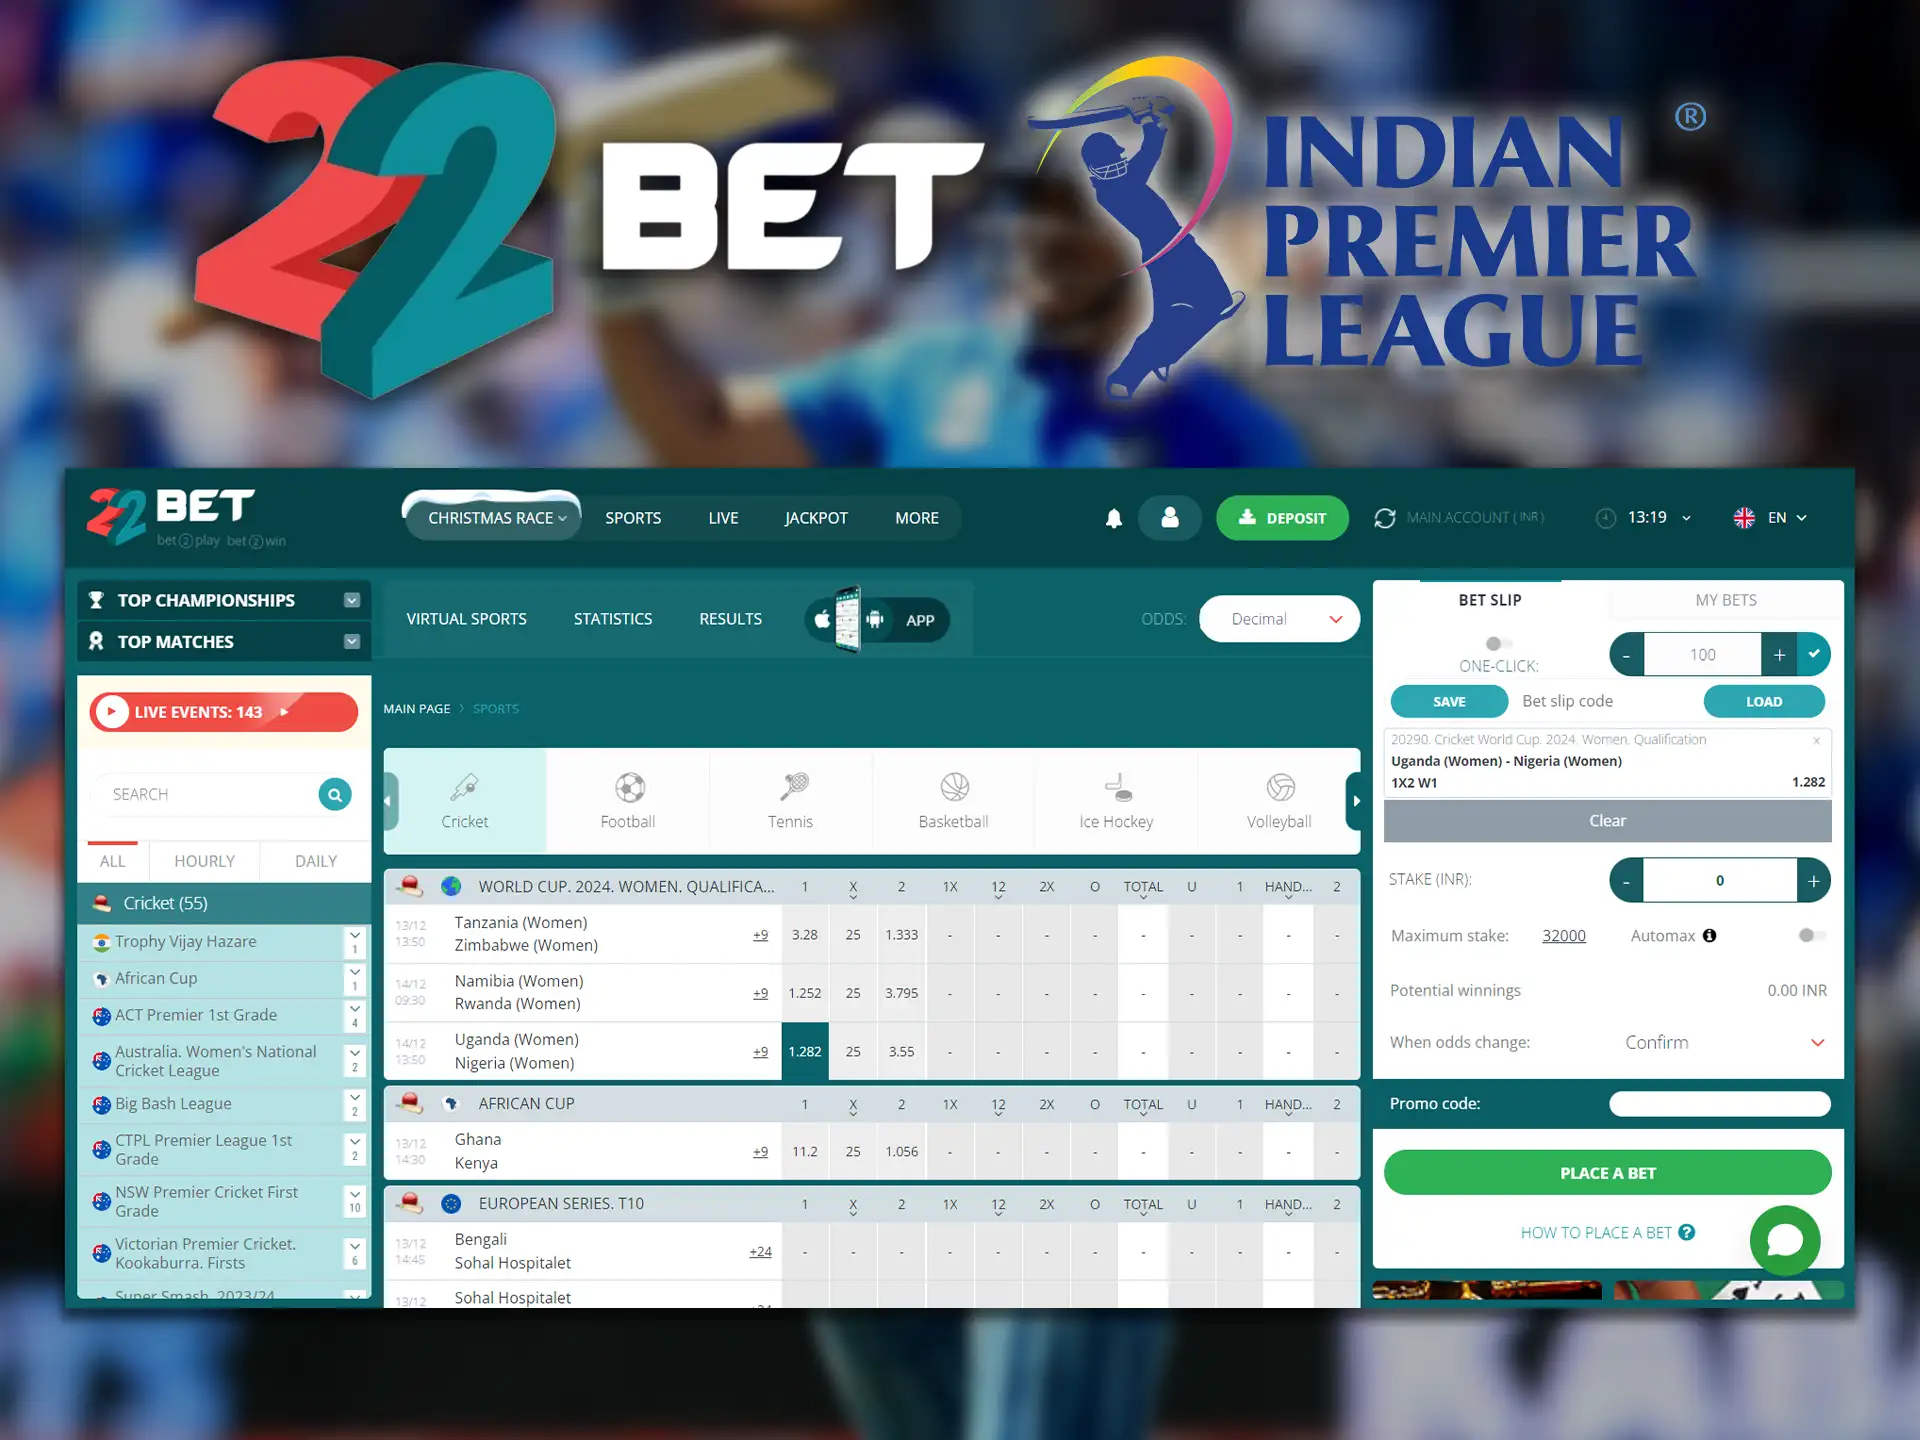 Every Indian bettor can bet on the most awaited sporting event IPL.